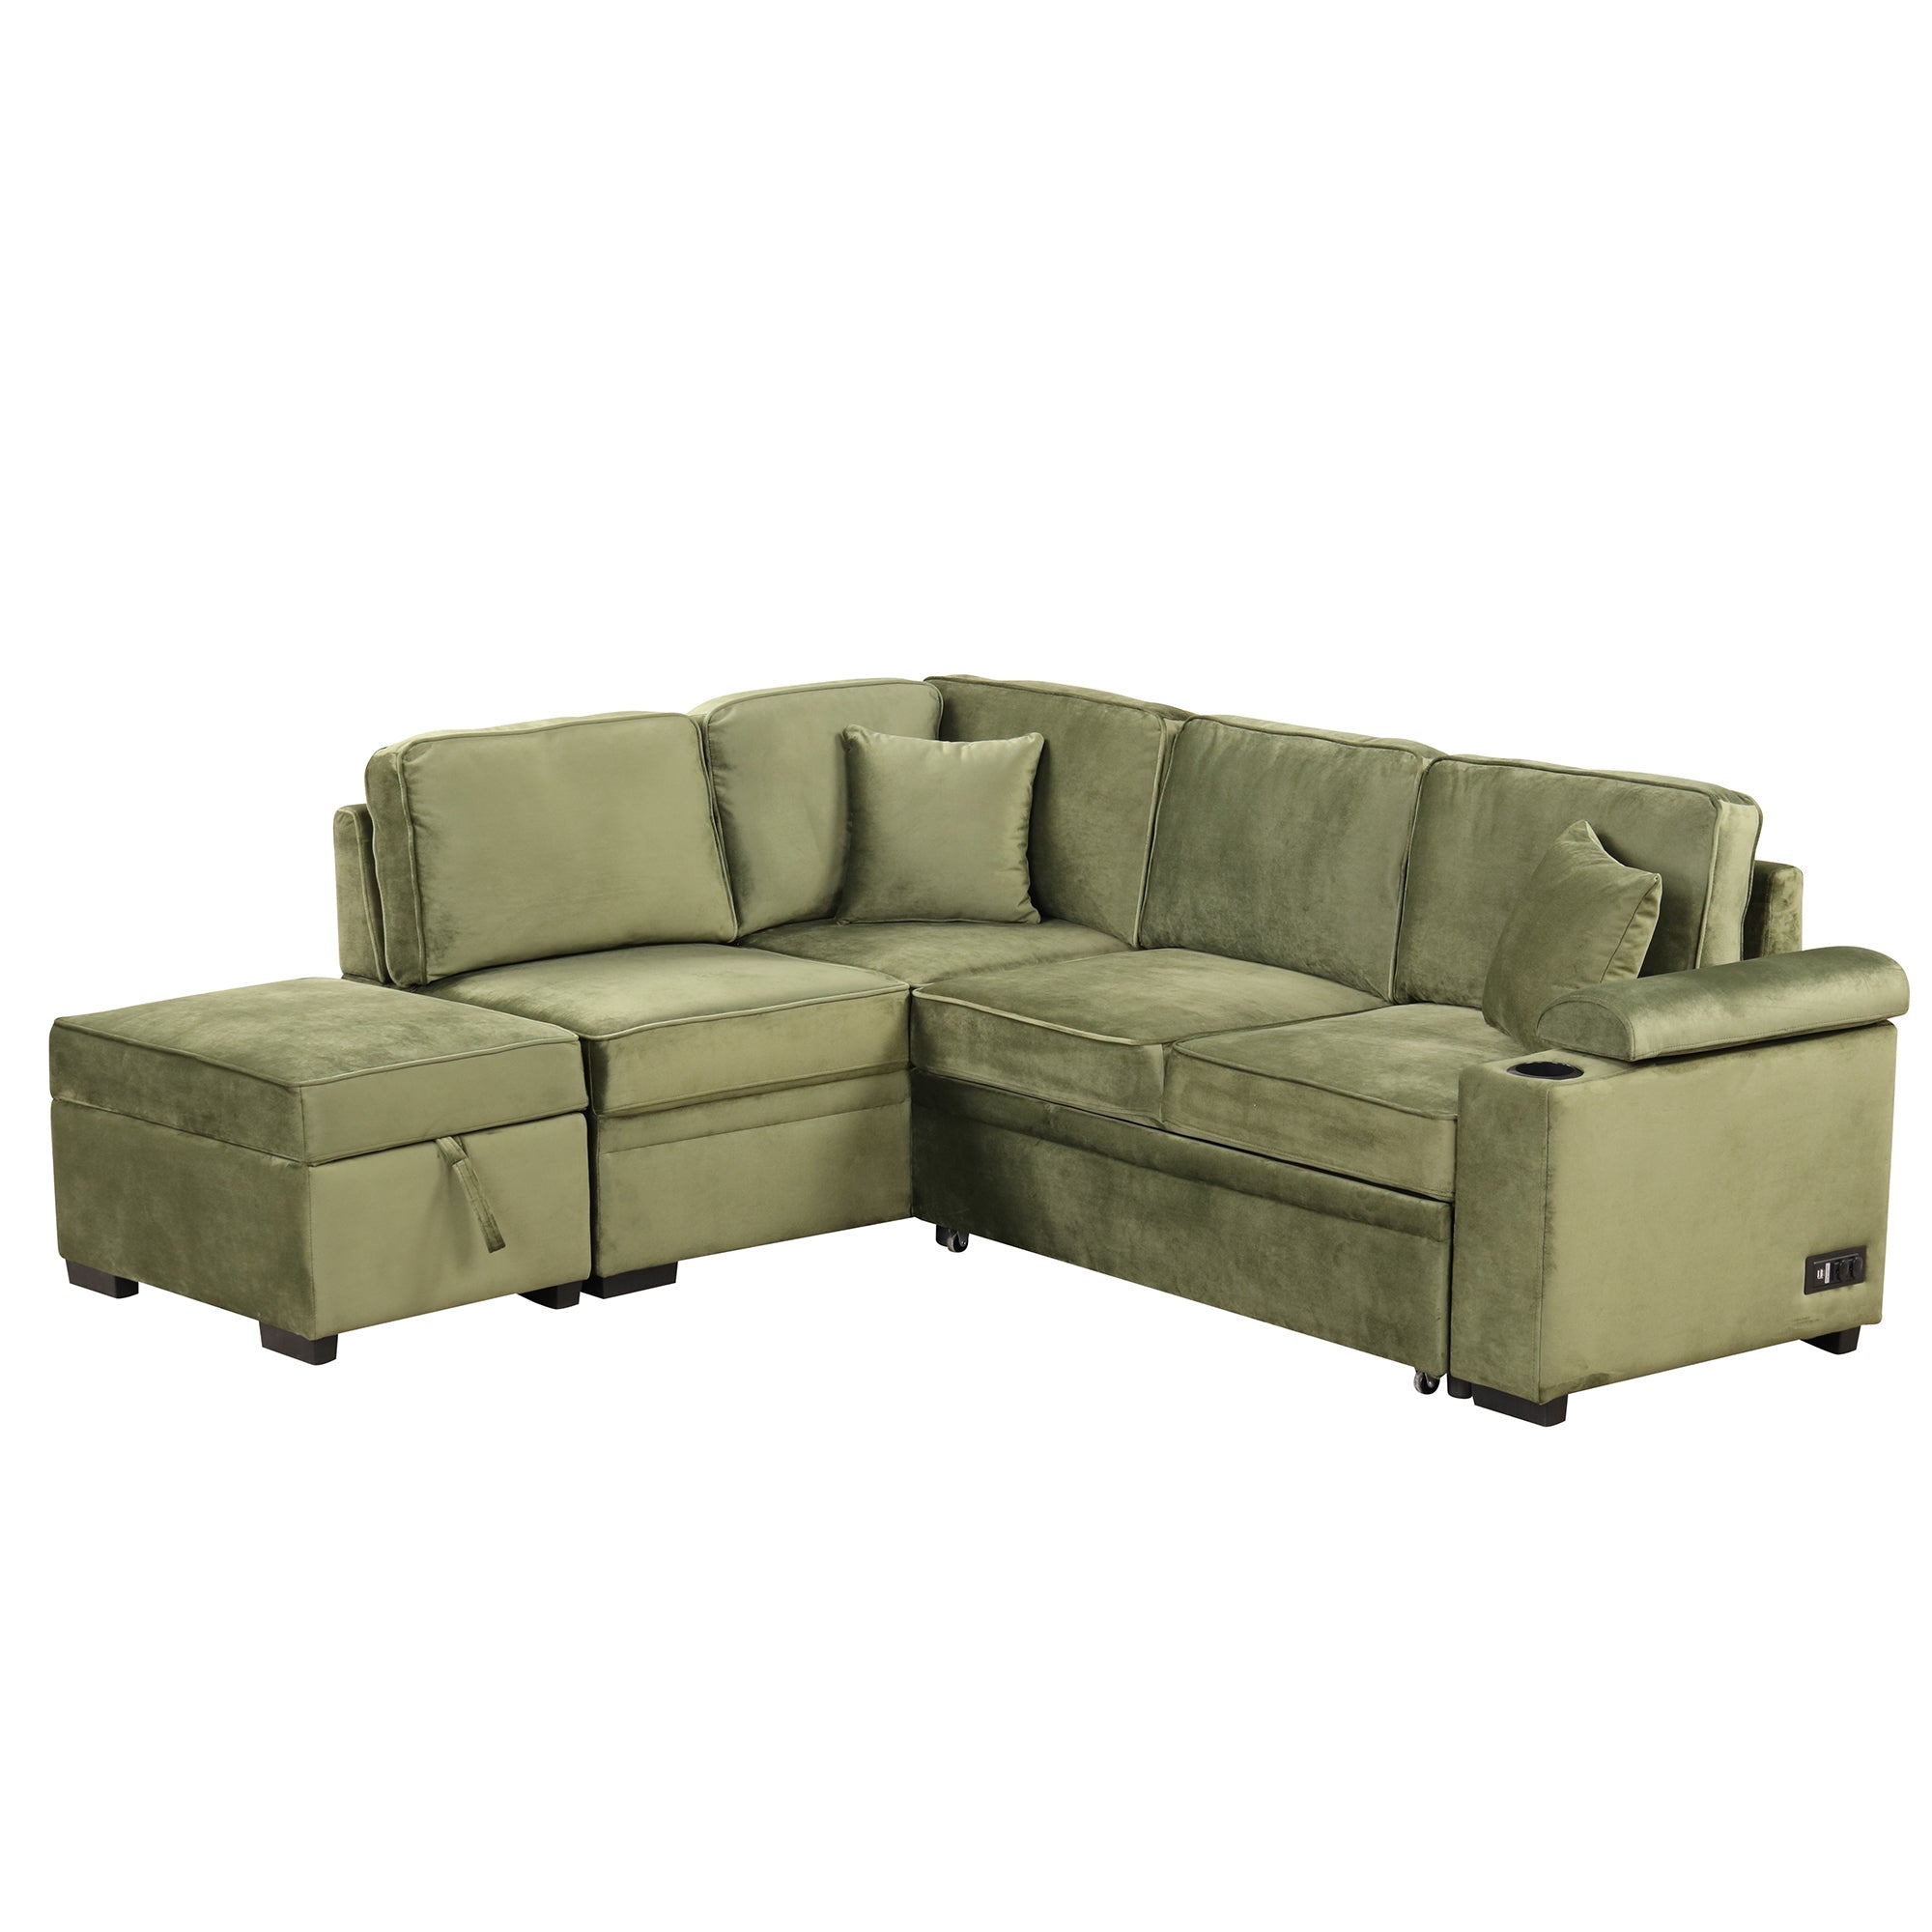 87.4" Green Velvet Sleeper Sectional Sofa L-Shaped w/ Storage Ottoman-Sleeper Sectionals-American Furniture Outlet